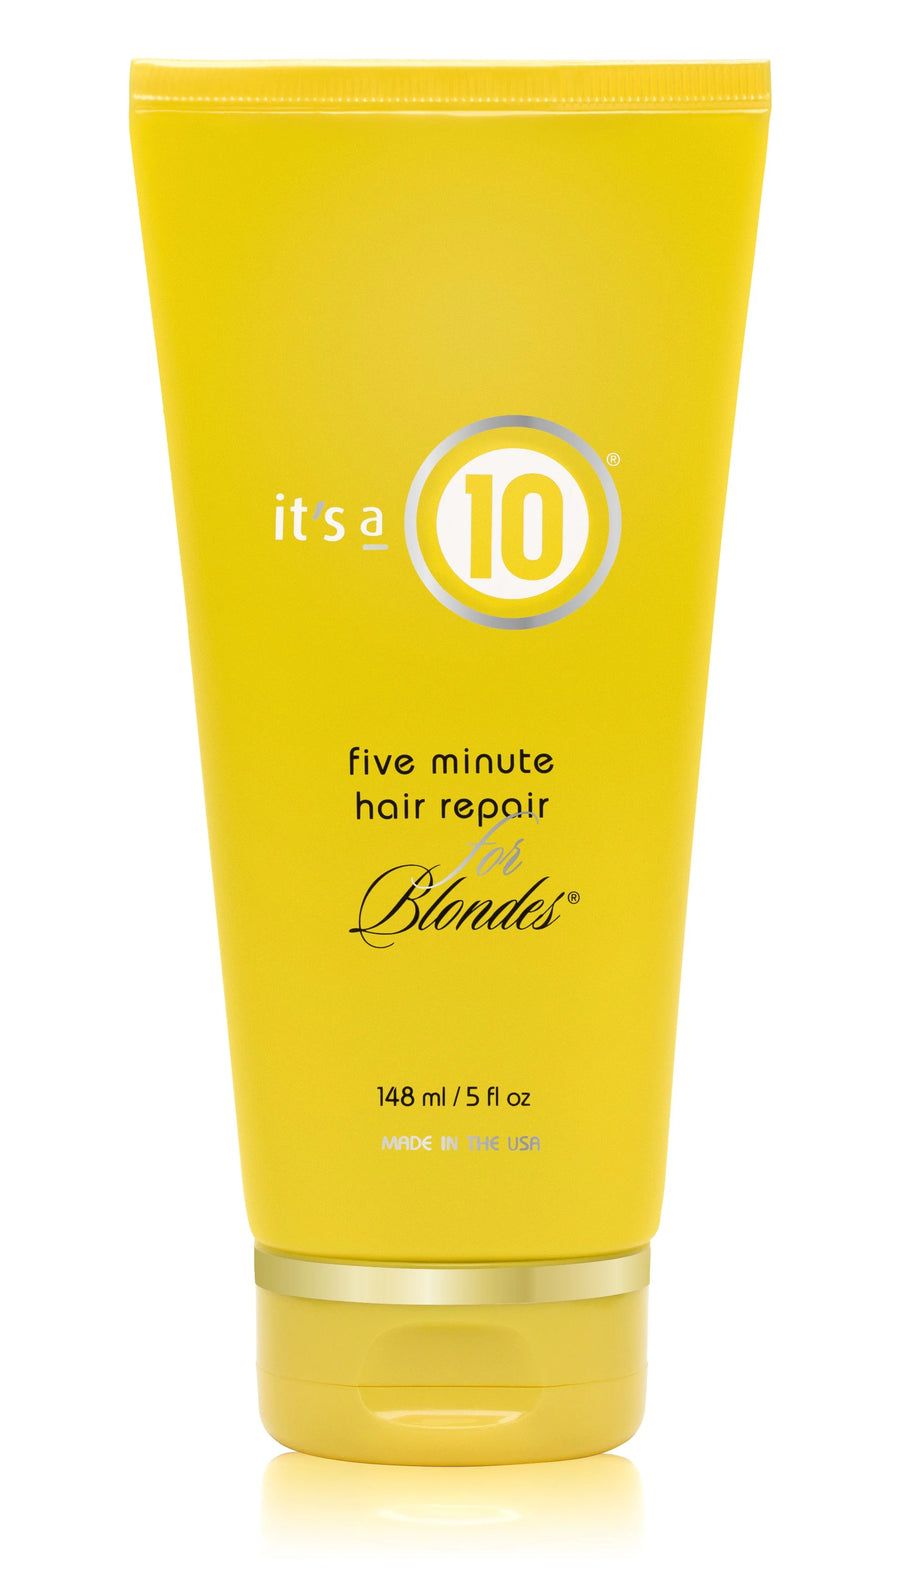 It's a 10 Five Minute Hair Repair for Blondes 5 oz bottle image